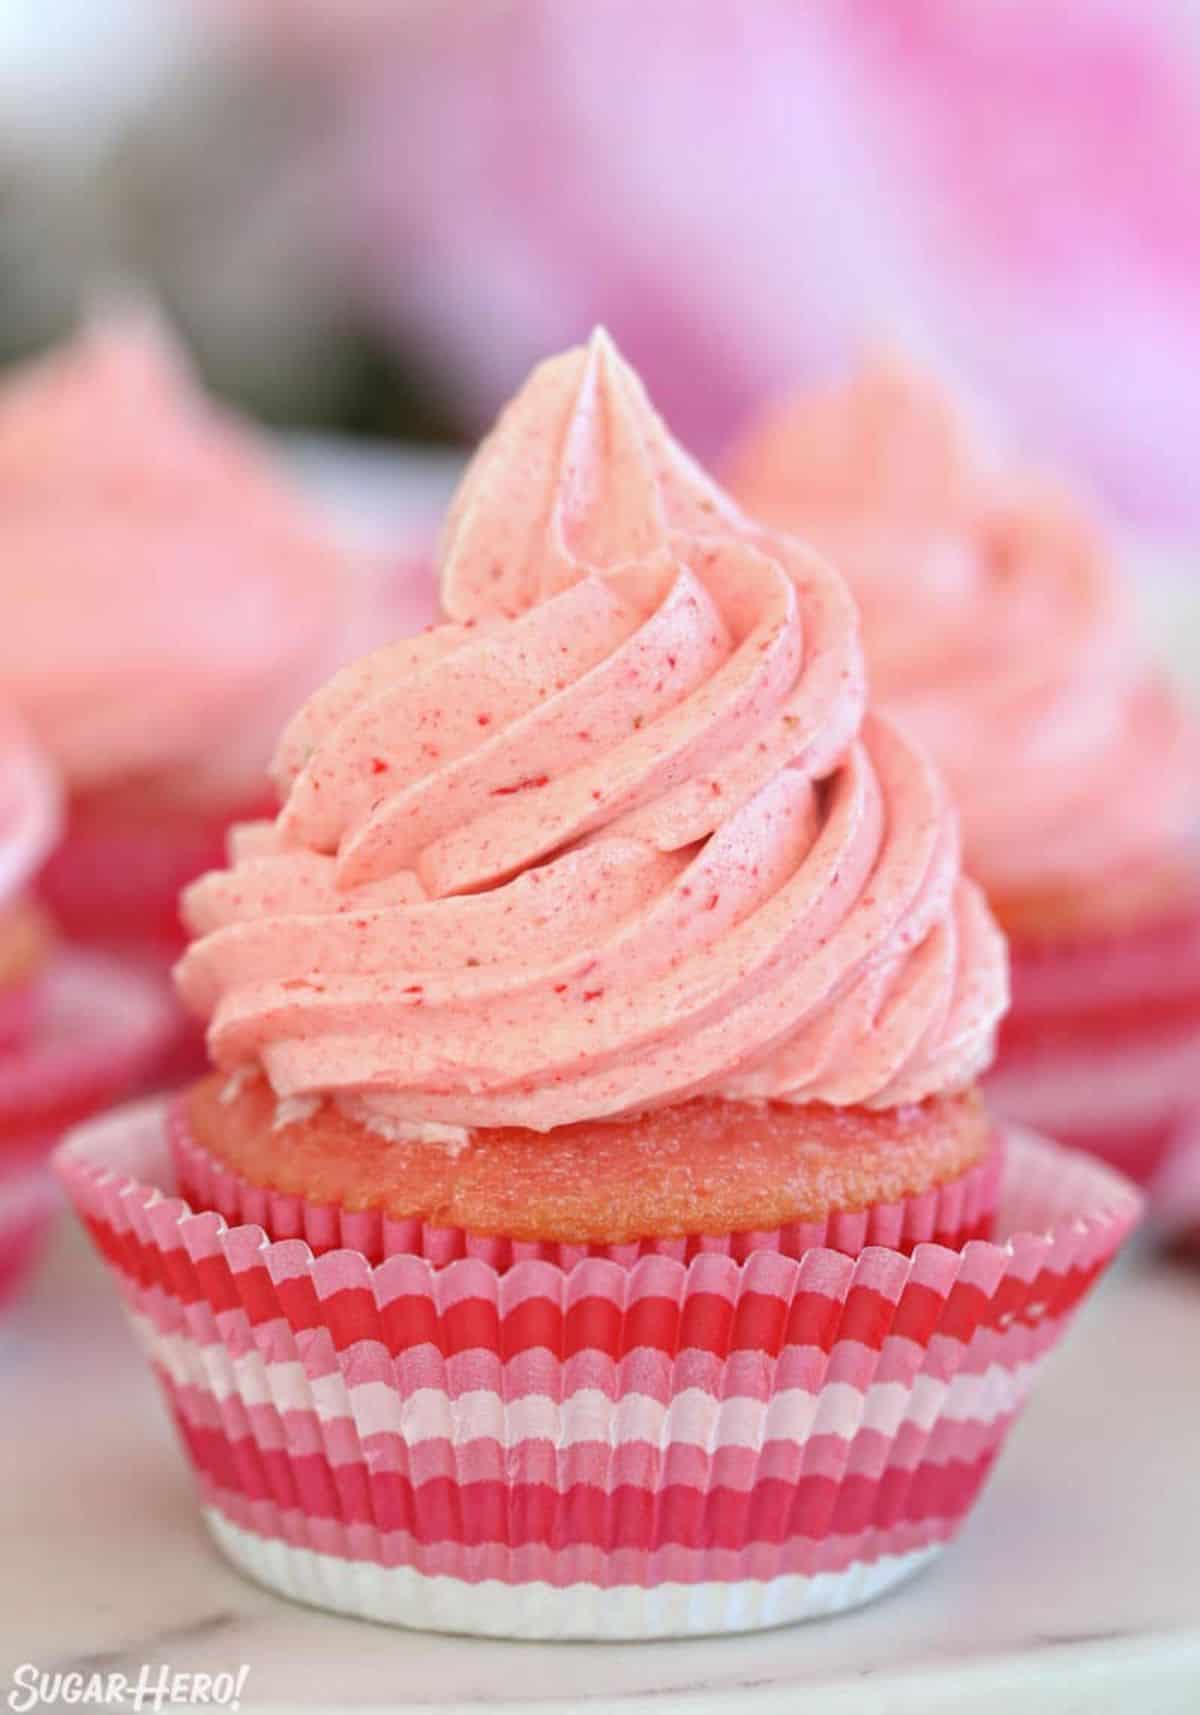 Strawberry Buttercream Frosting on a cupcake.